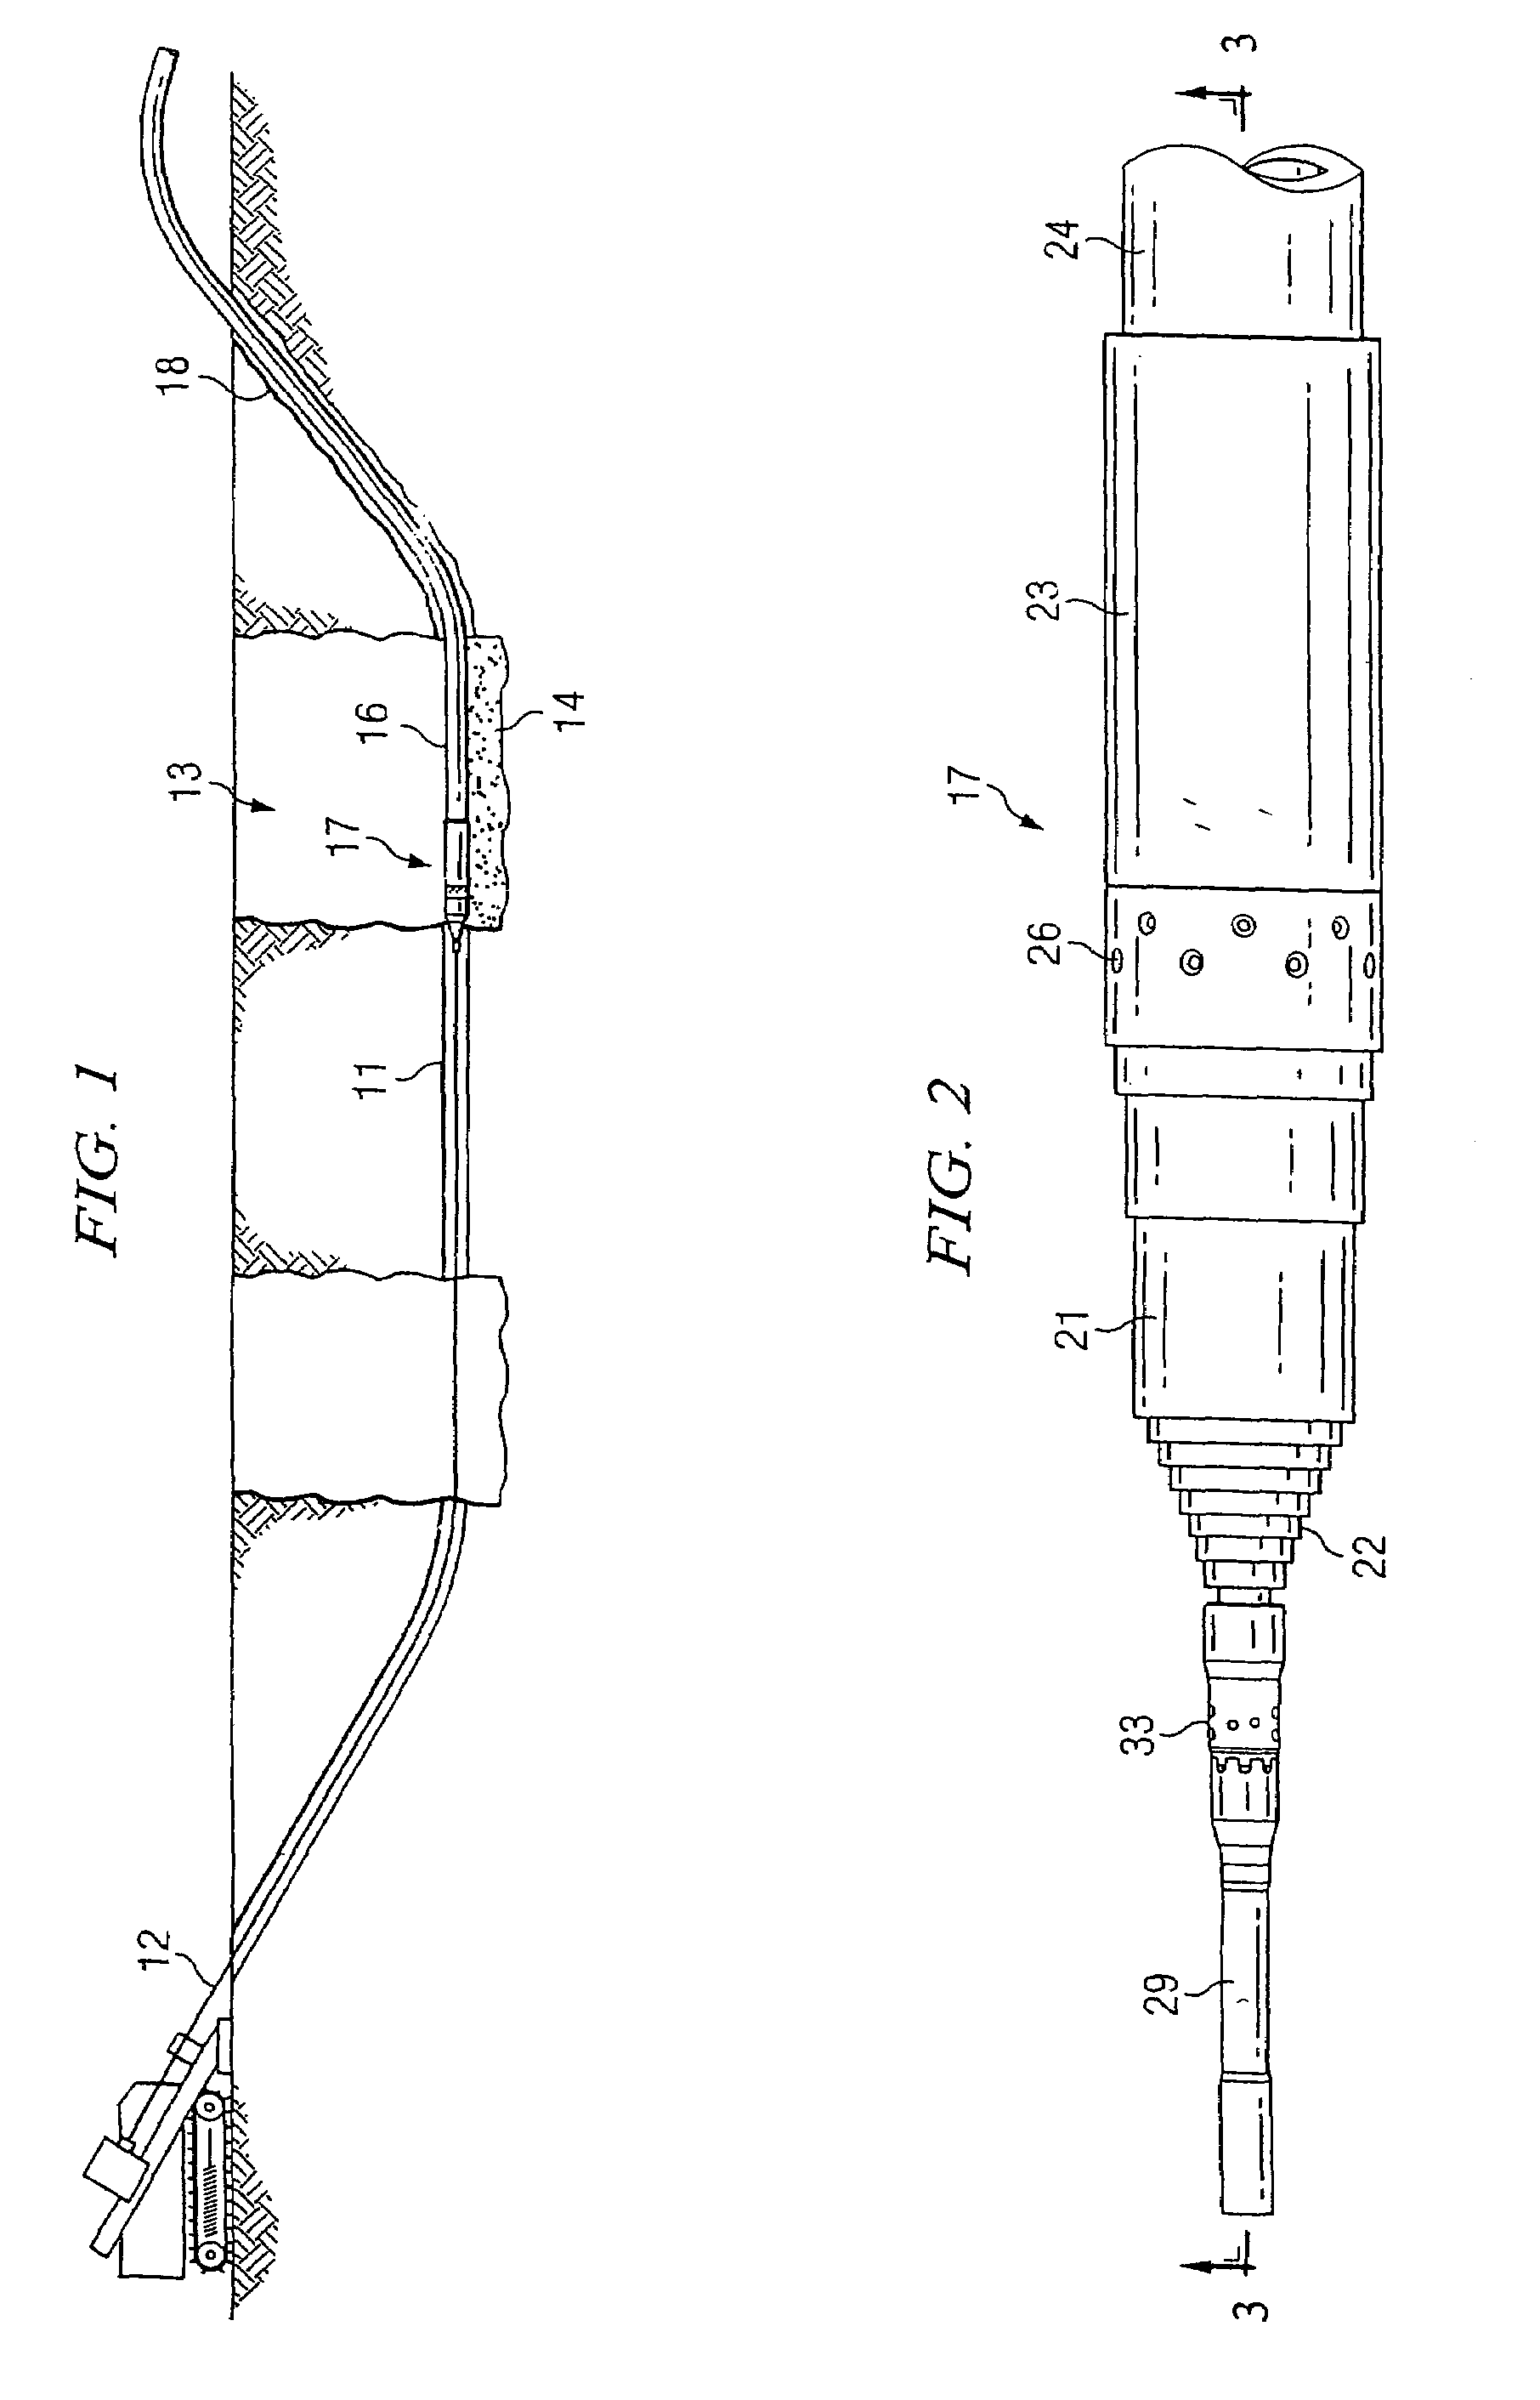 Method and apparatus for on-grade boring